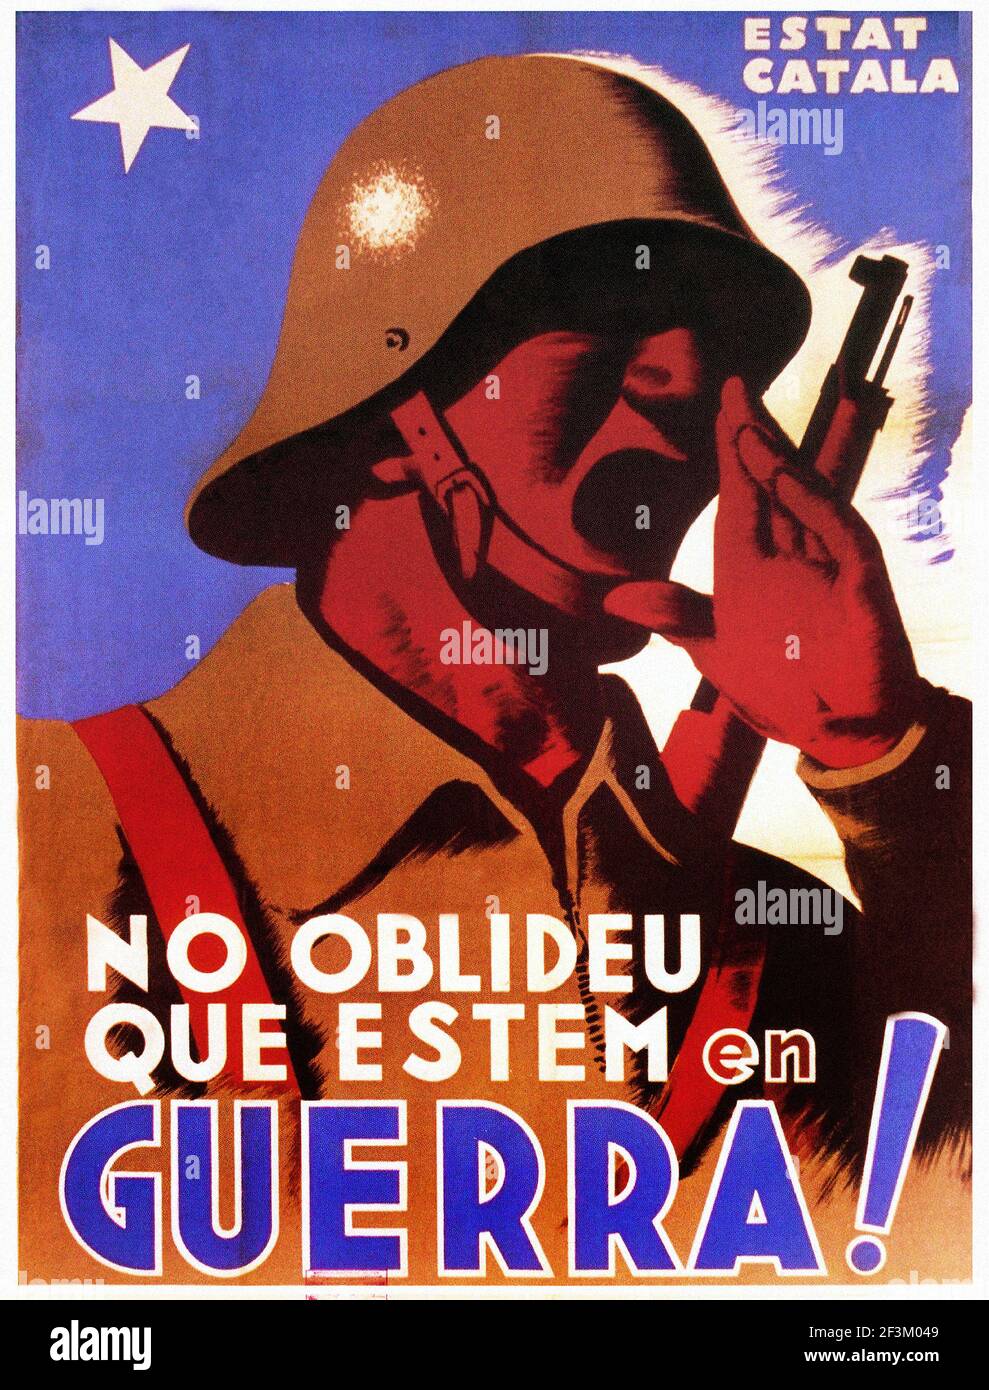 Spanish Civil War propaganda poster.  1936-1939. The relations of the 'Estat Catala' with the NAZI III Reich offensive truths. Stock Photo